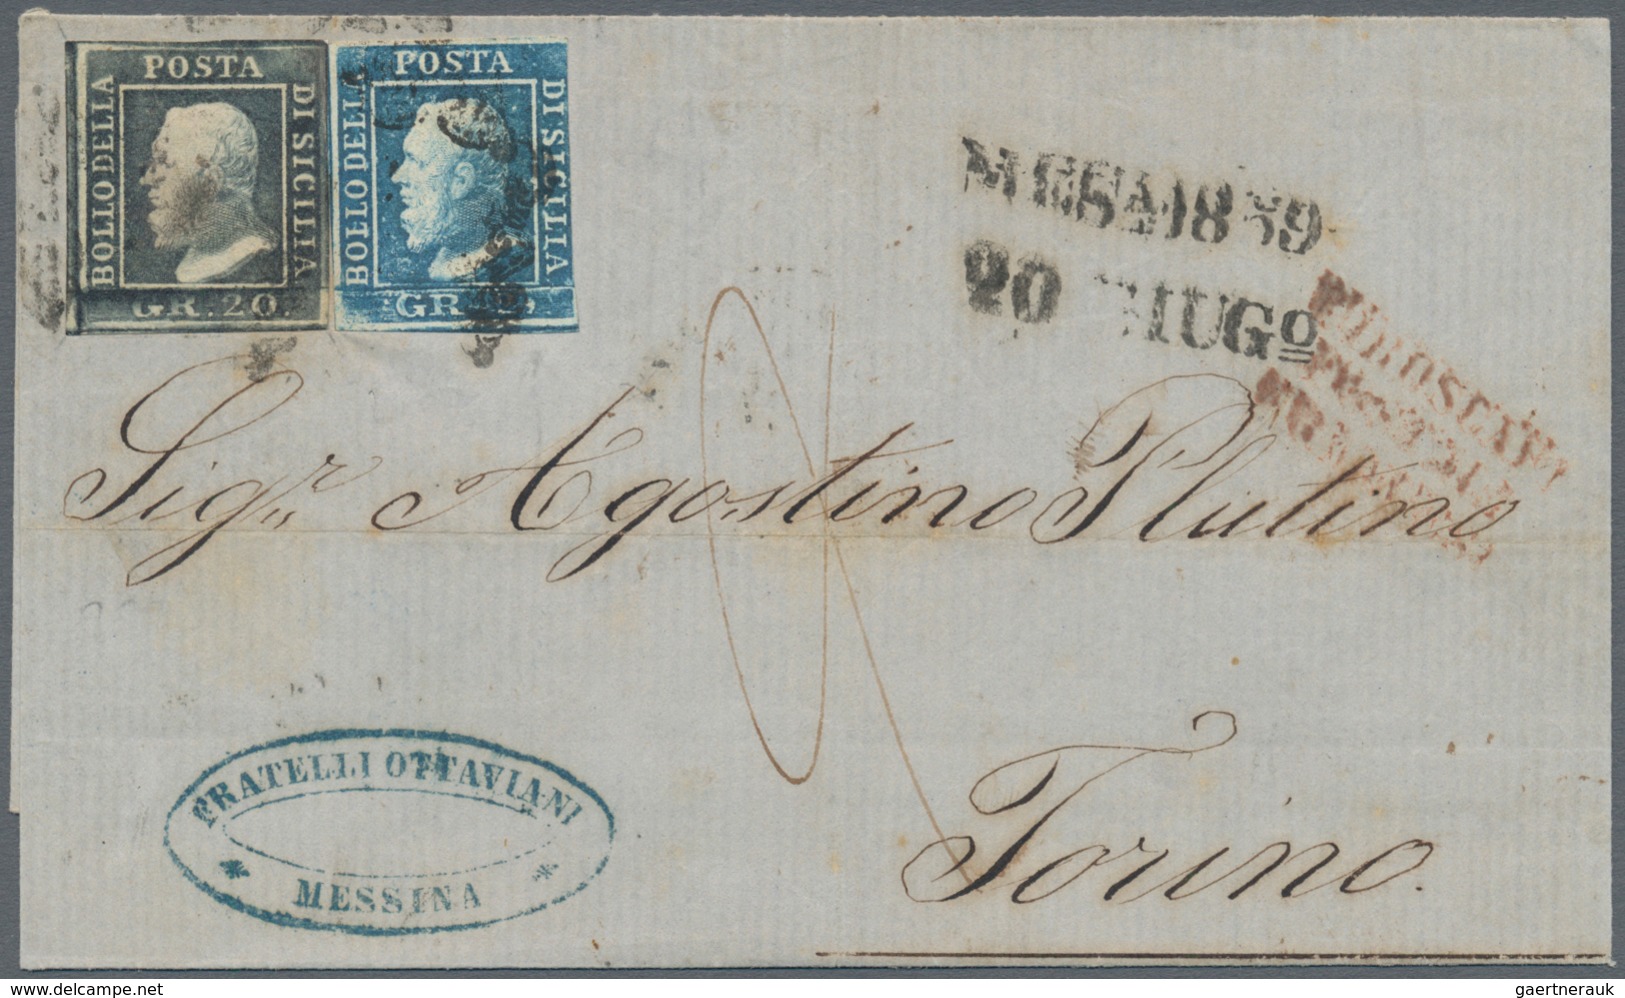 00870 Italien - Altitalienische Staaten: Sizilien: 1859: 20 Grana Gray And 2 Grana Blue, Both Tied By "hor - Sizilien